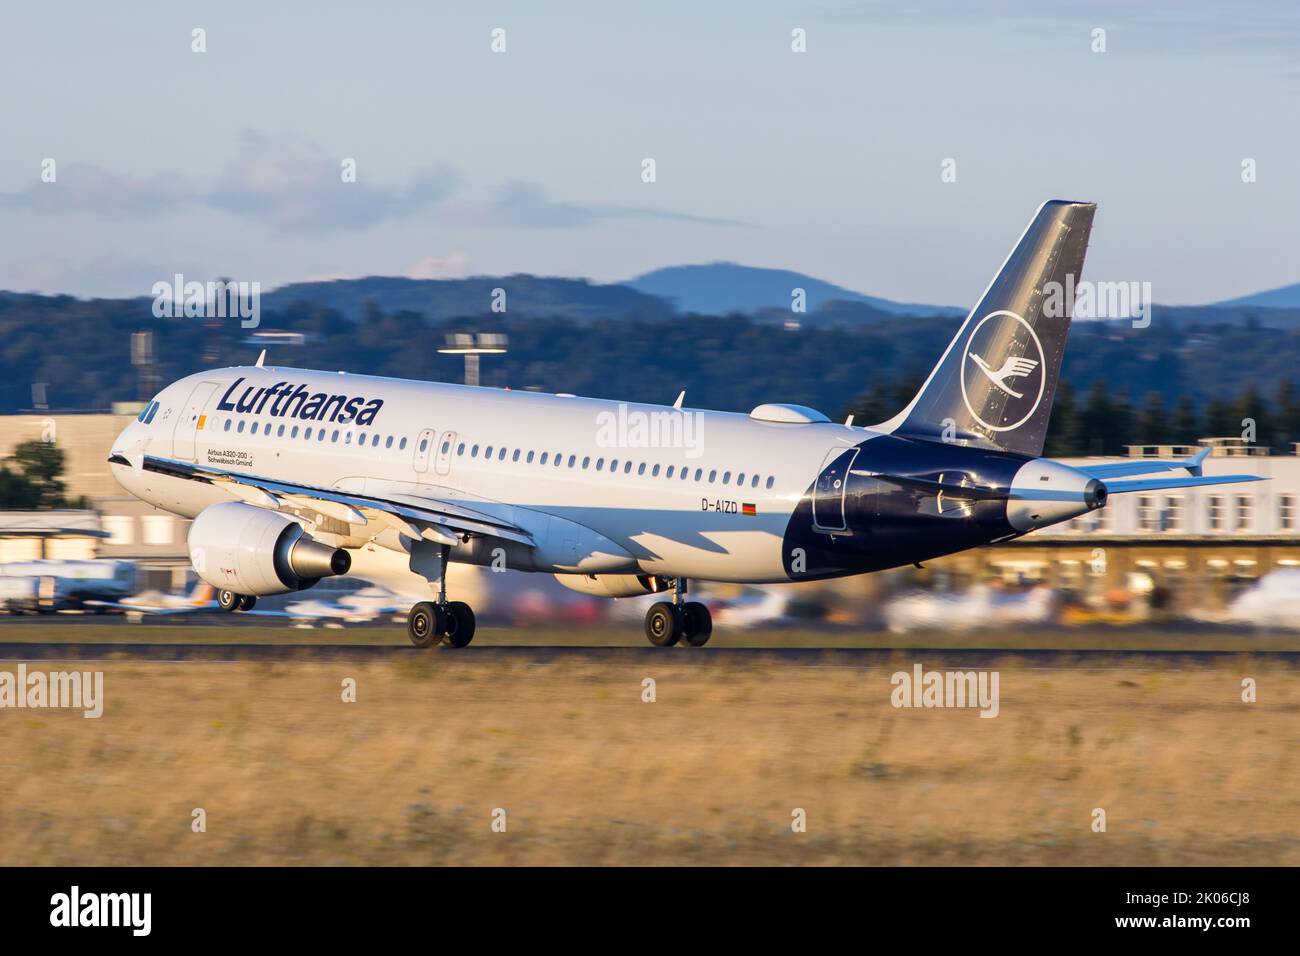 A Lufthansa Airbus A320 on the runway at airport Graz departing for a flight to Munich Stock Photo